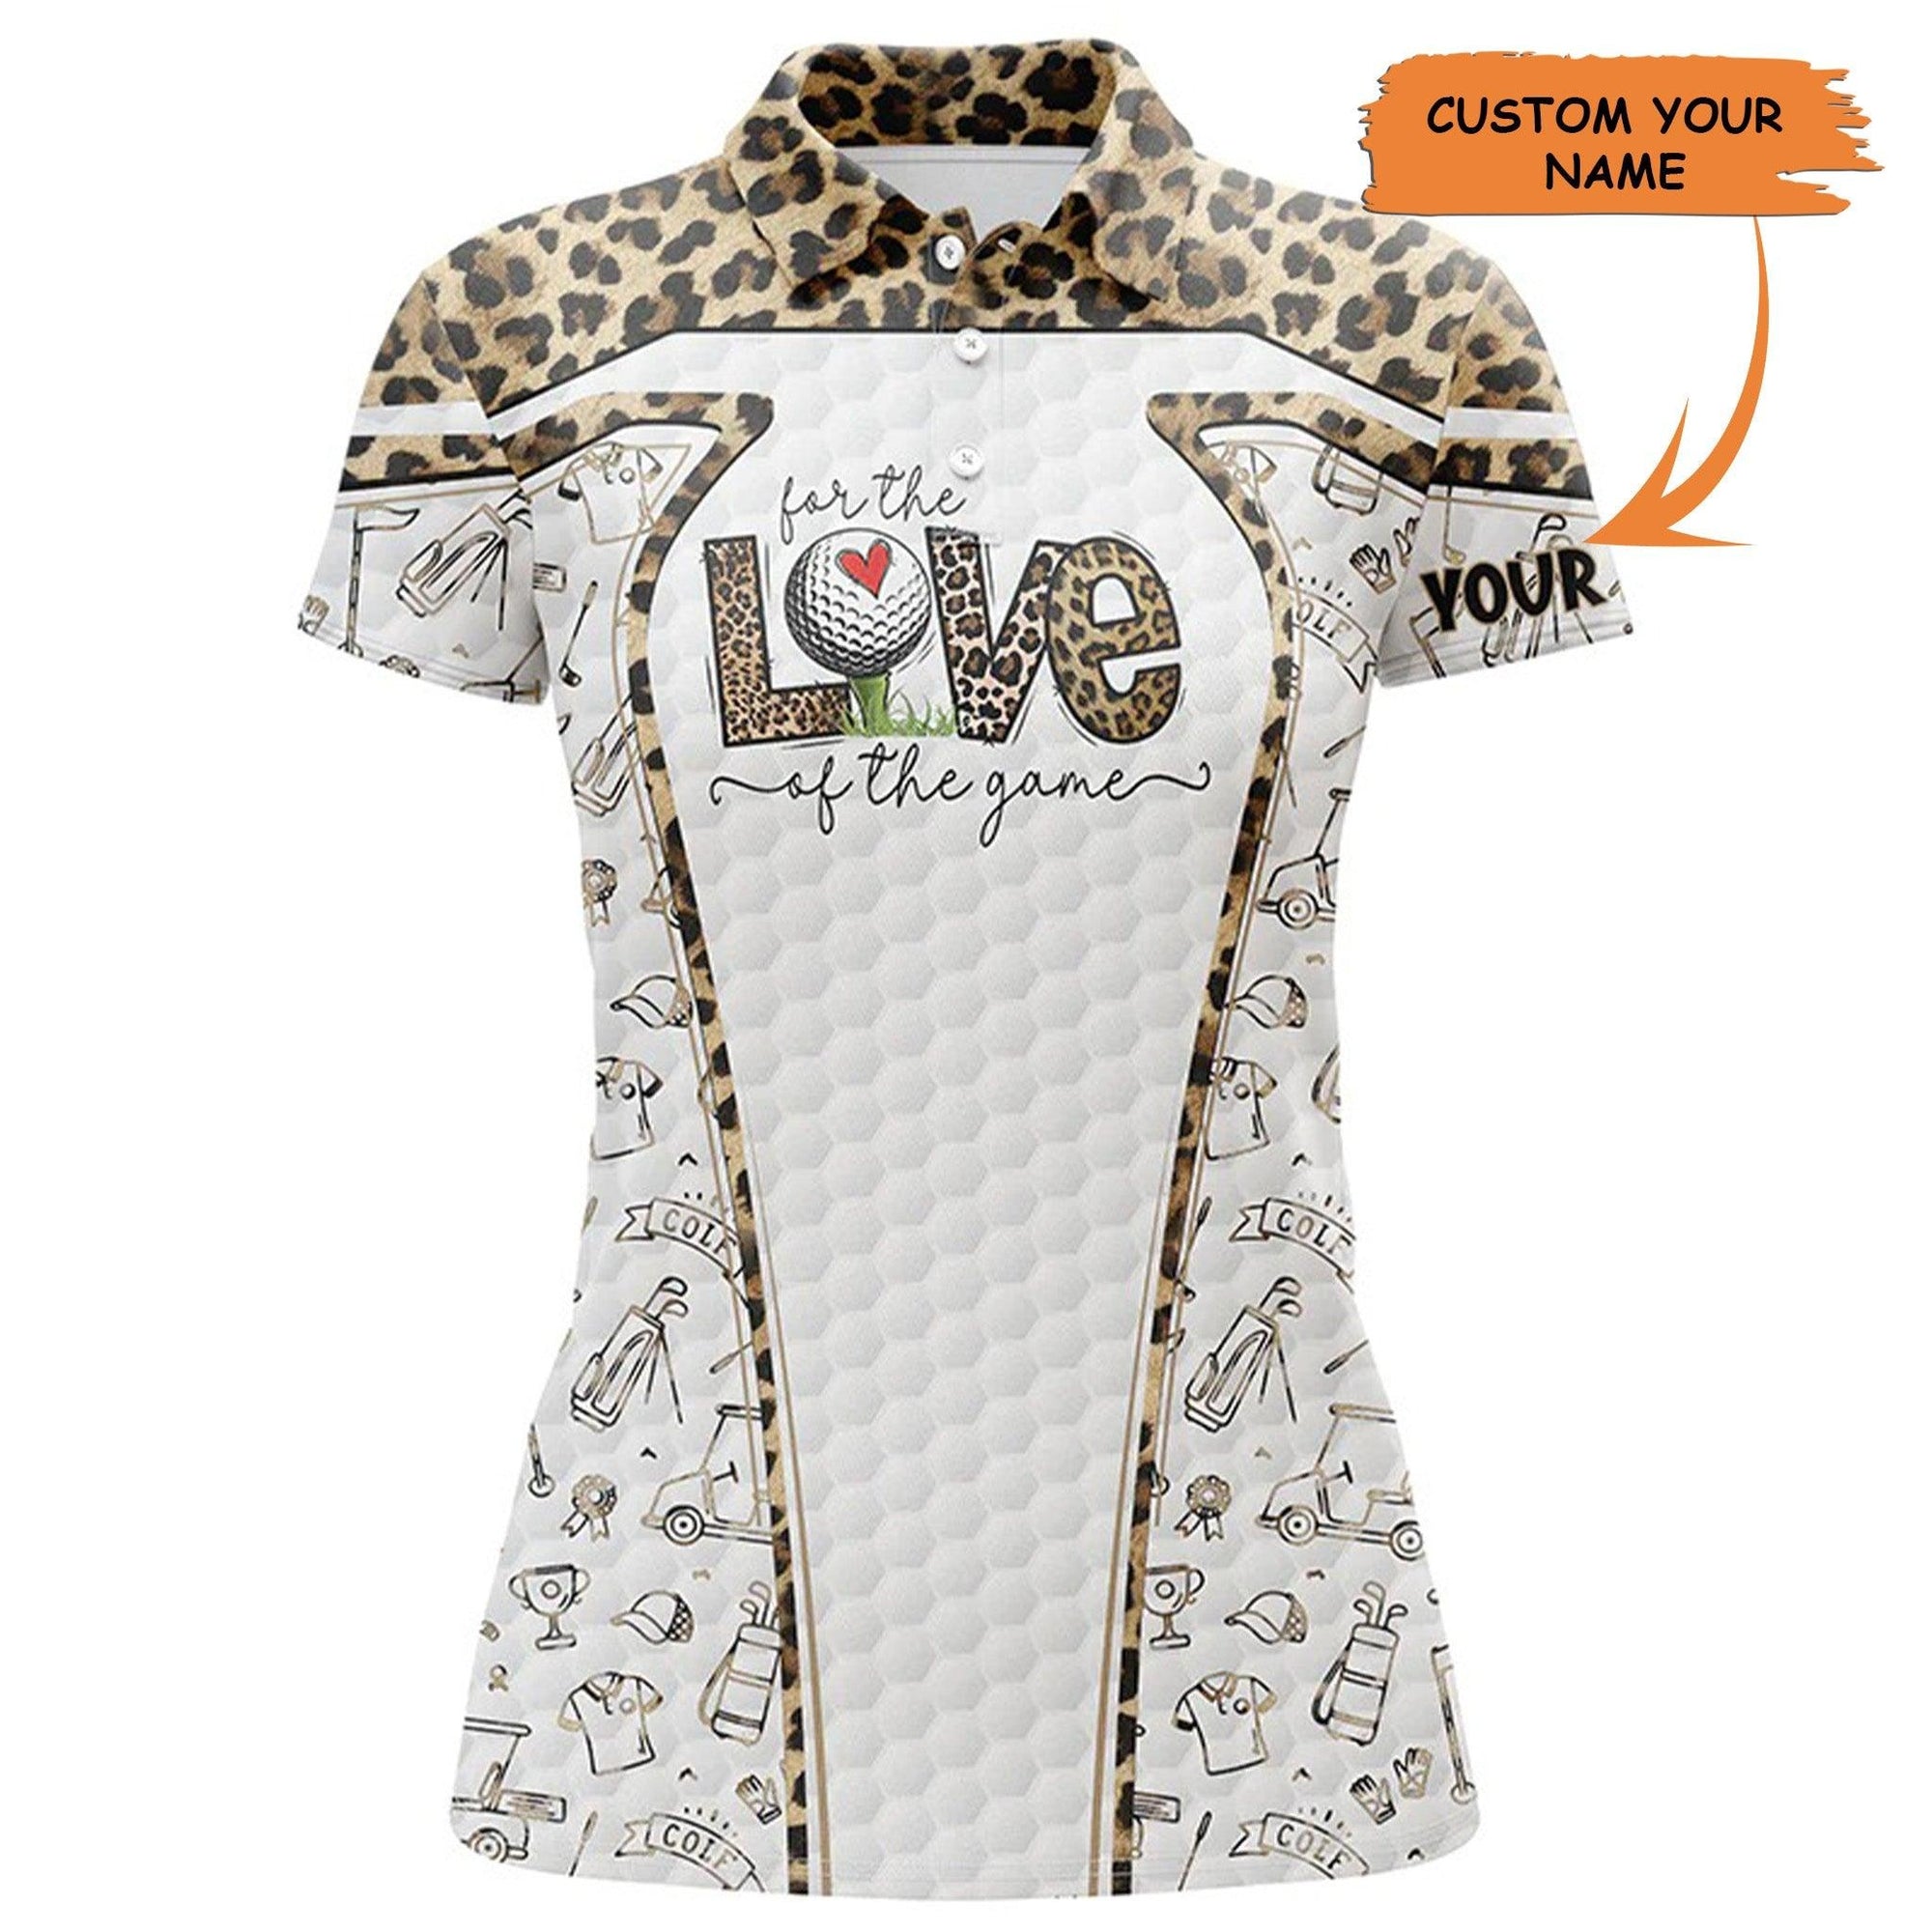 Customized Golf Women Sleeveless Polo Shirts, Personalized The Love Of The Game Leopard Pattern Golf Shirts - Perfect Gift For Ladies, Golf Lovers, Golfers